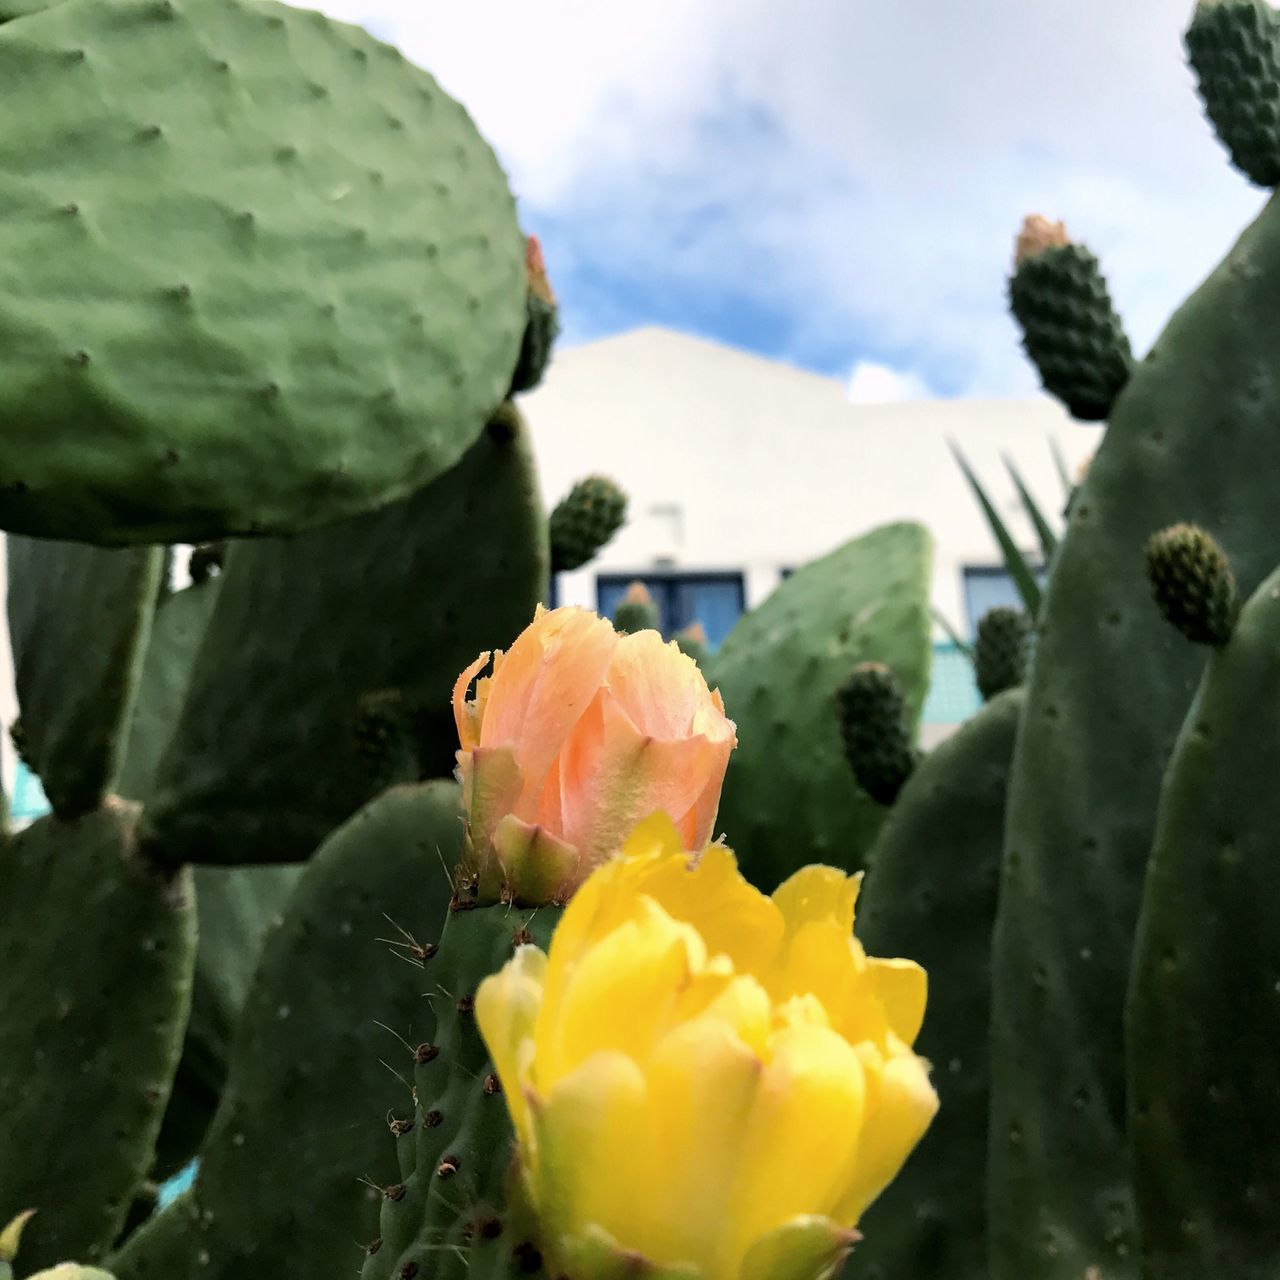 beauty in nature, nature, flower, cactus, outdoors, prickly pear cactus, green color, growth, no people, day, freshness, close-up, petal, yellow, fragility, plant, sky, flower head